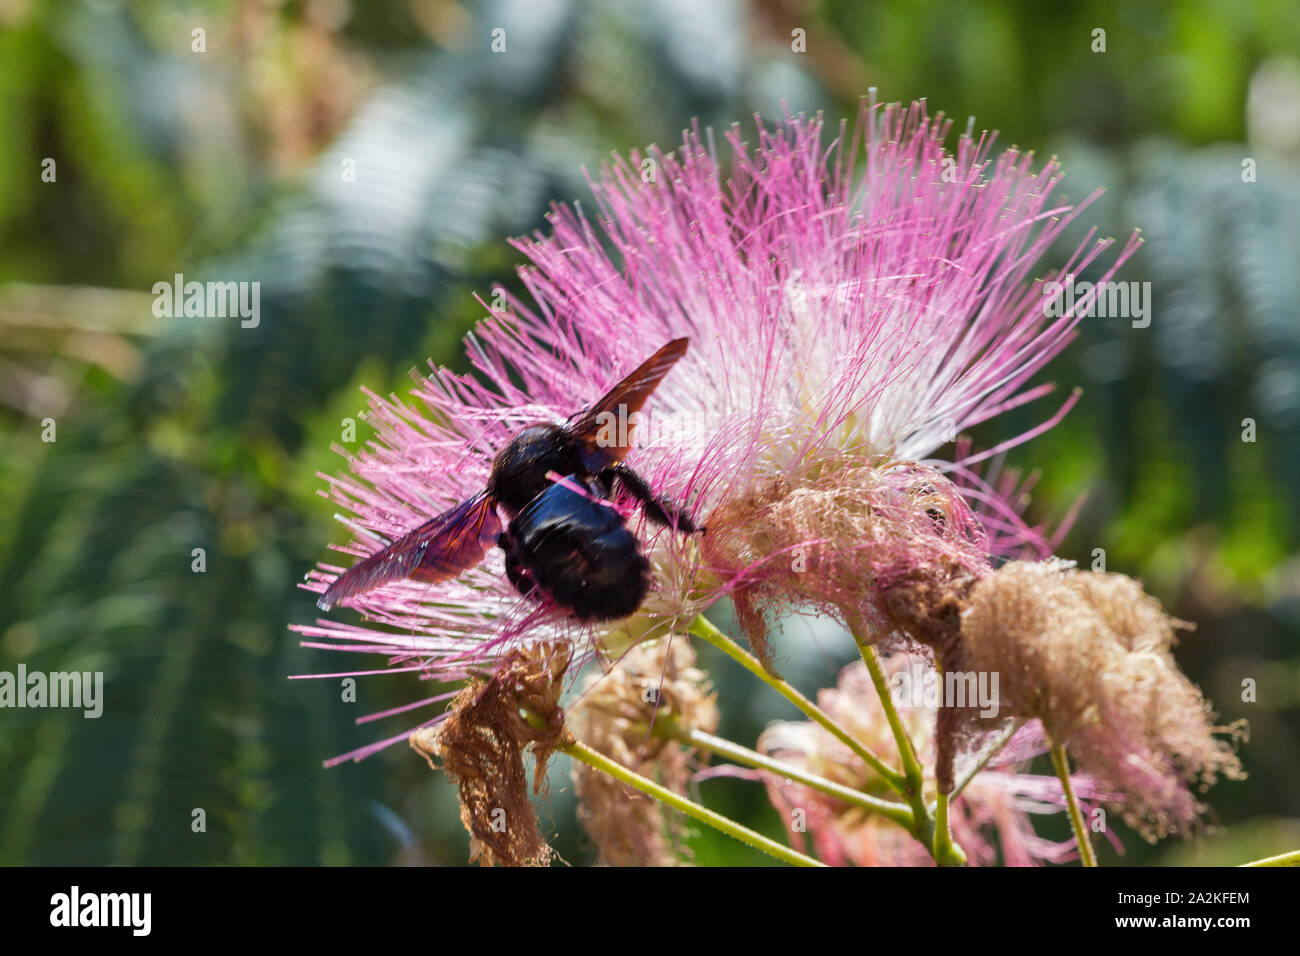 Blossoming Albizia julibrissin pink flower with big black bumblebee on Corsica island, France. Albizia julibrissin is known as Lenkoran acacia tree as Stock Photo